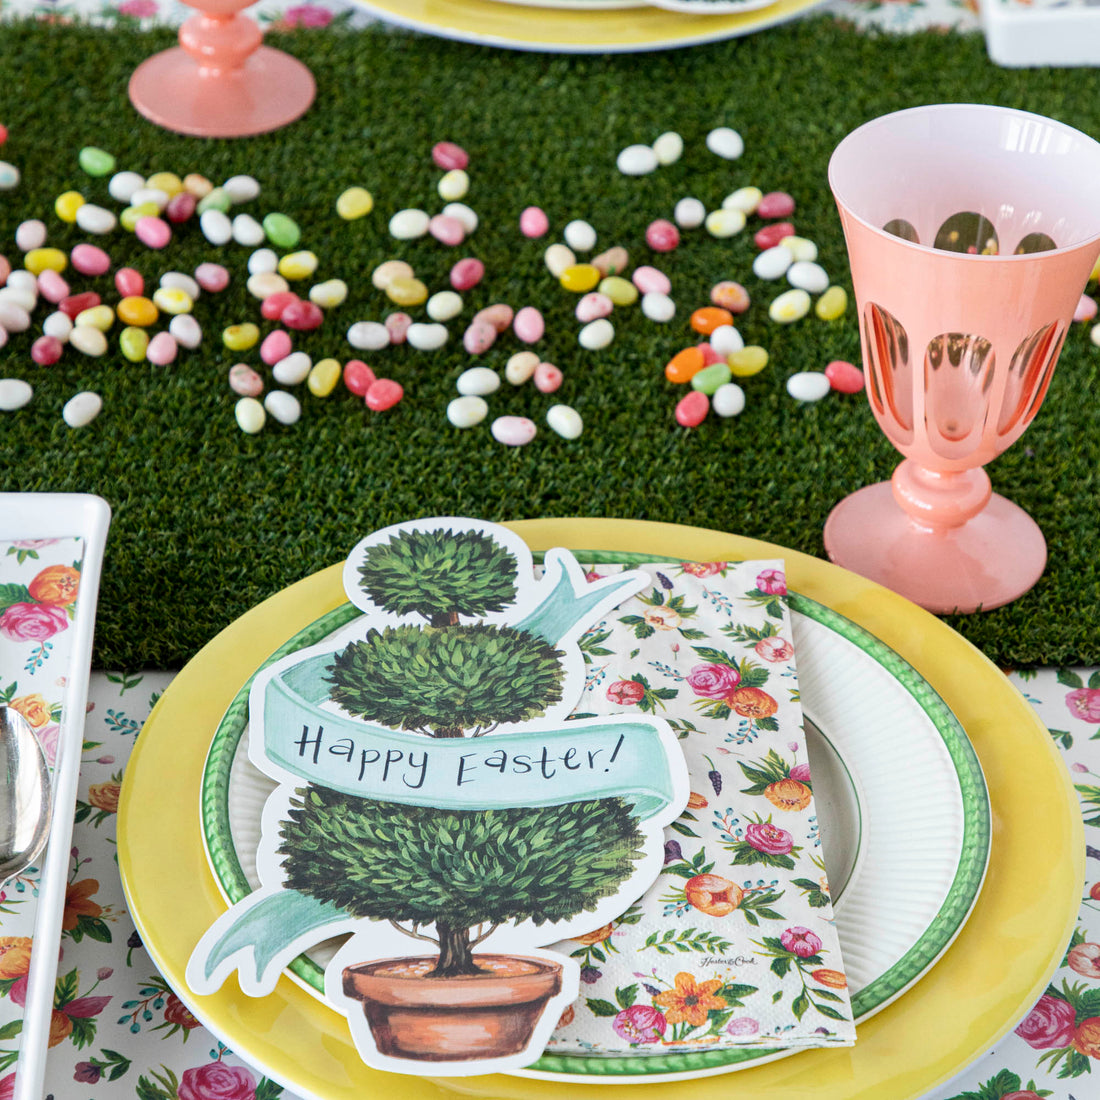 A festive Easter table setting with colorful plates and napkins, adorned with a Talking Tables Artificial Grass Table Runner.